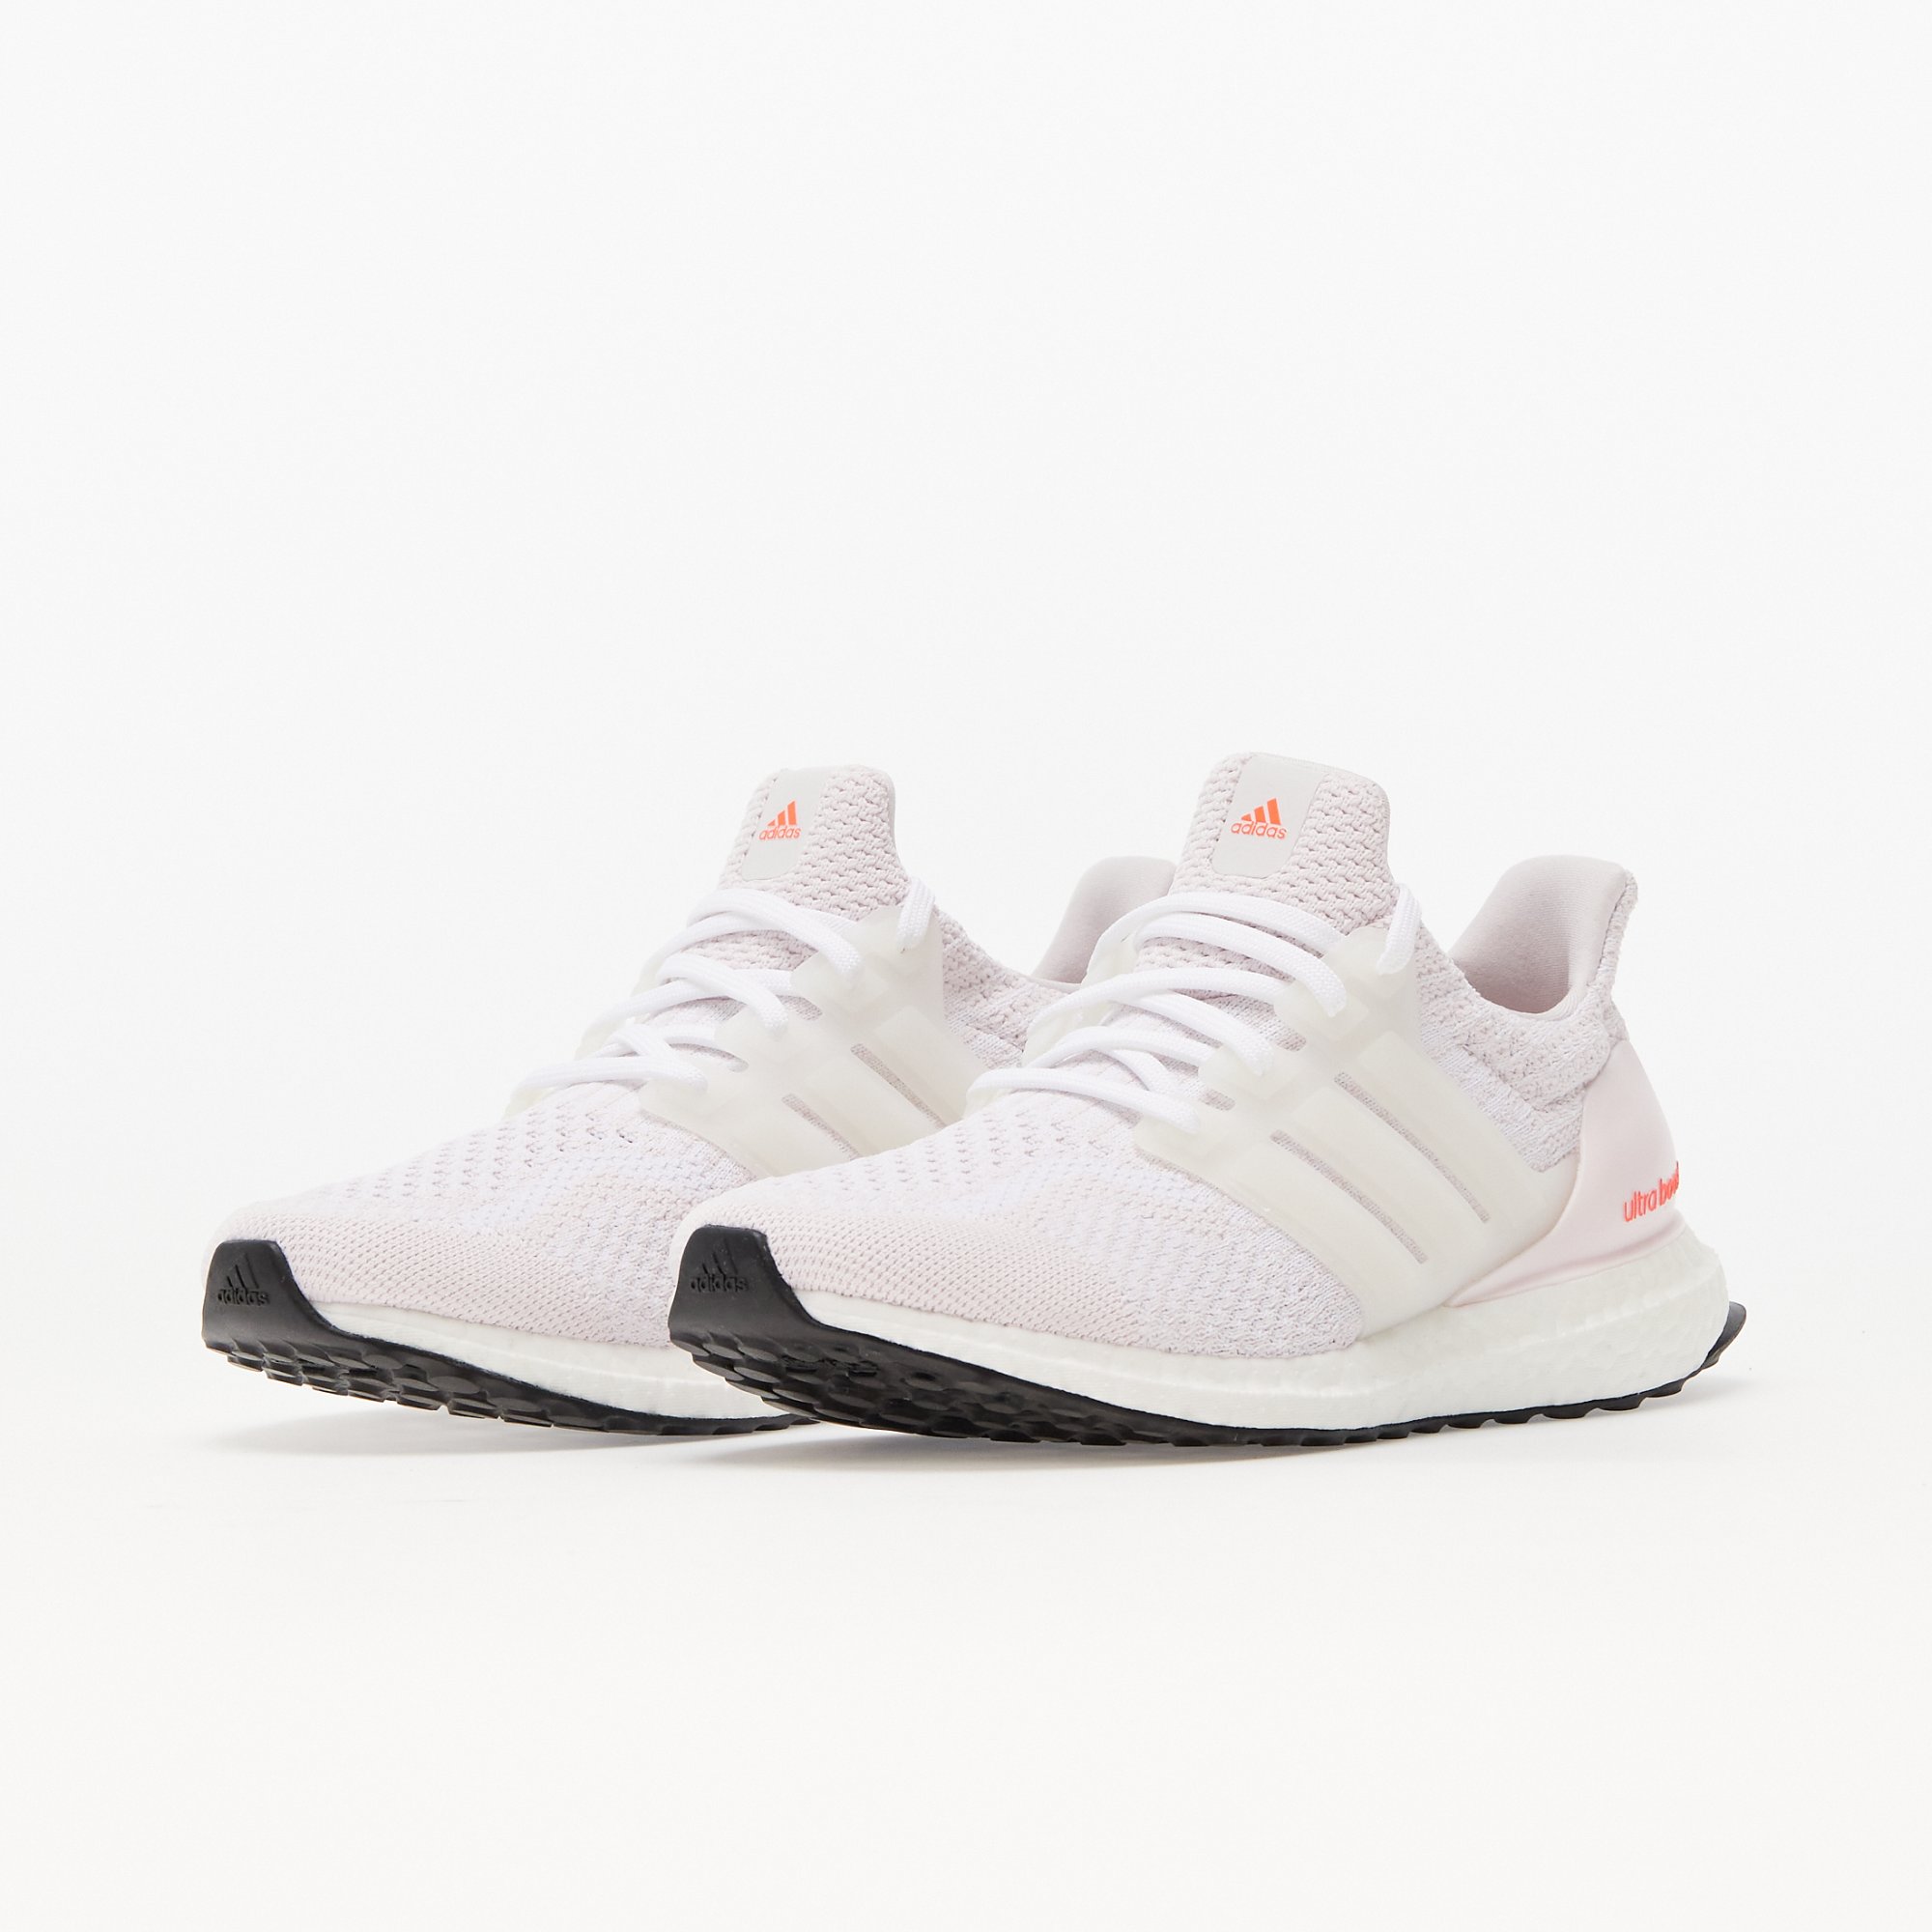 adidas Performance Ultraboost 5.0 DNA W Almost Pink / Cloud White / Turbo adidas Performance